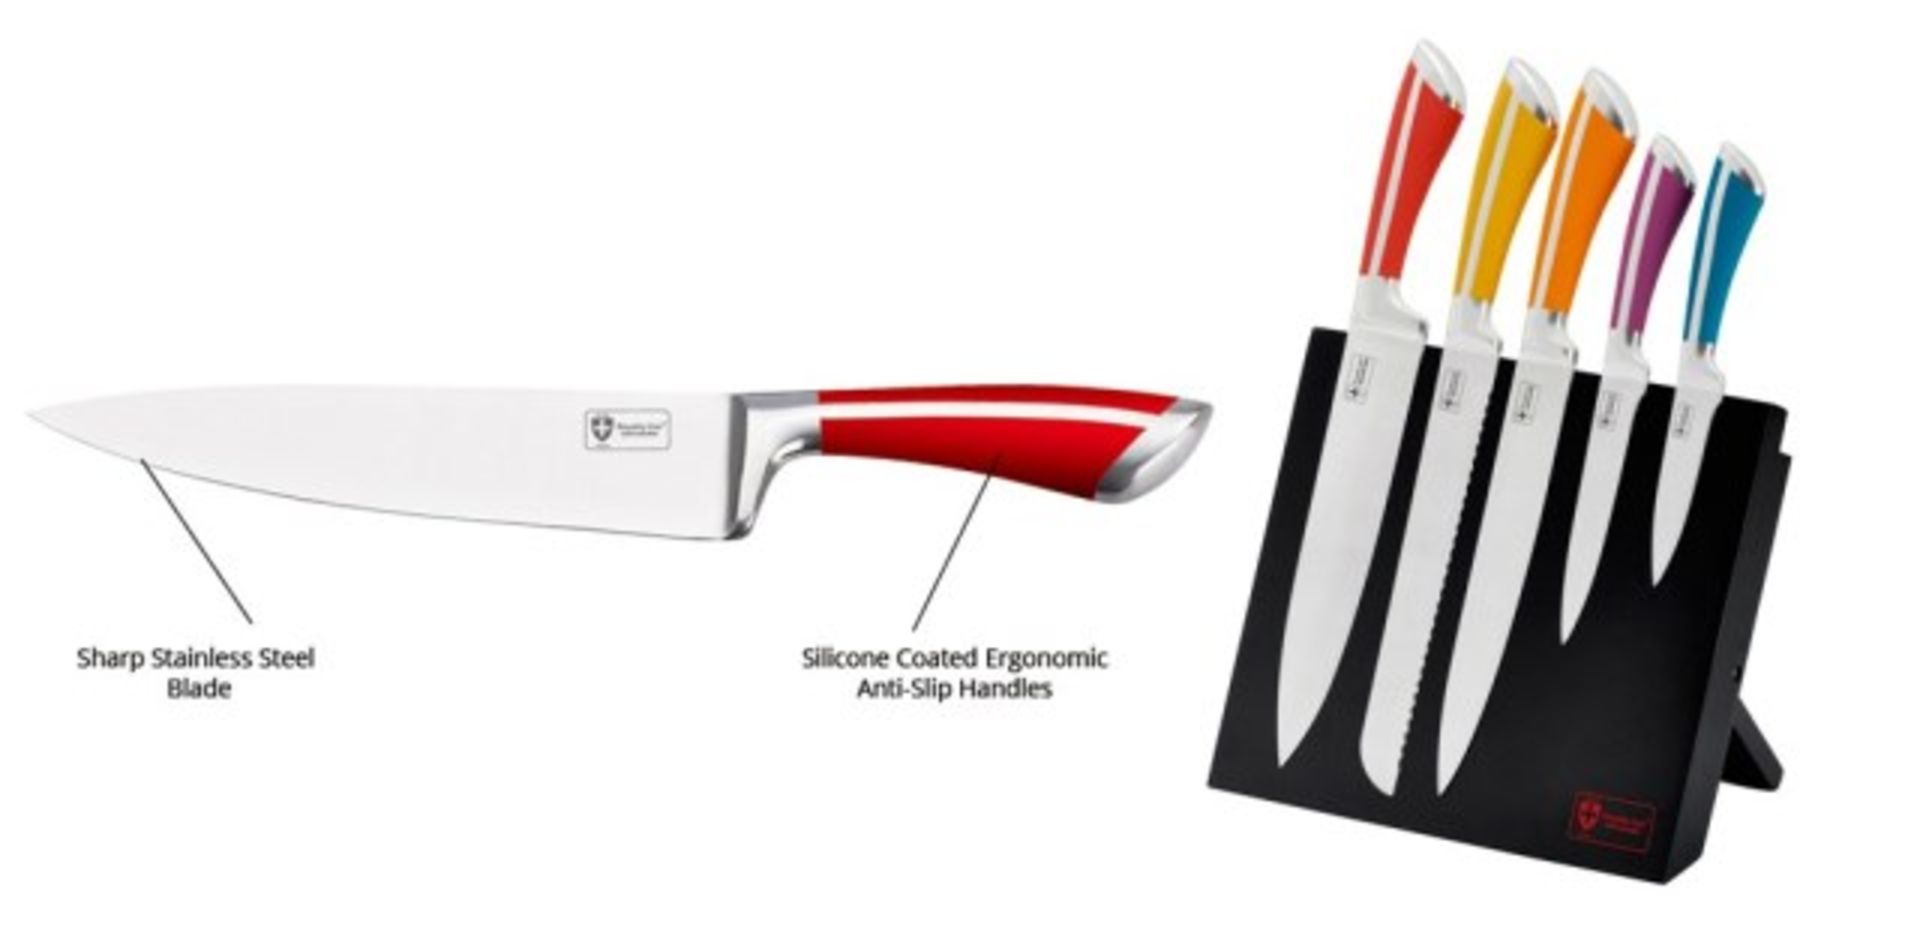 V Brand New 5 Piece Swiss Knife Set With Folding Magnetic Stand RRP199 Euros X 2 YOUR BID PRICE TO